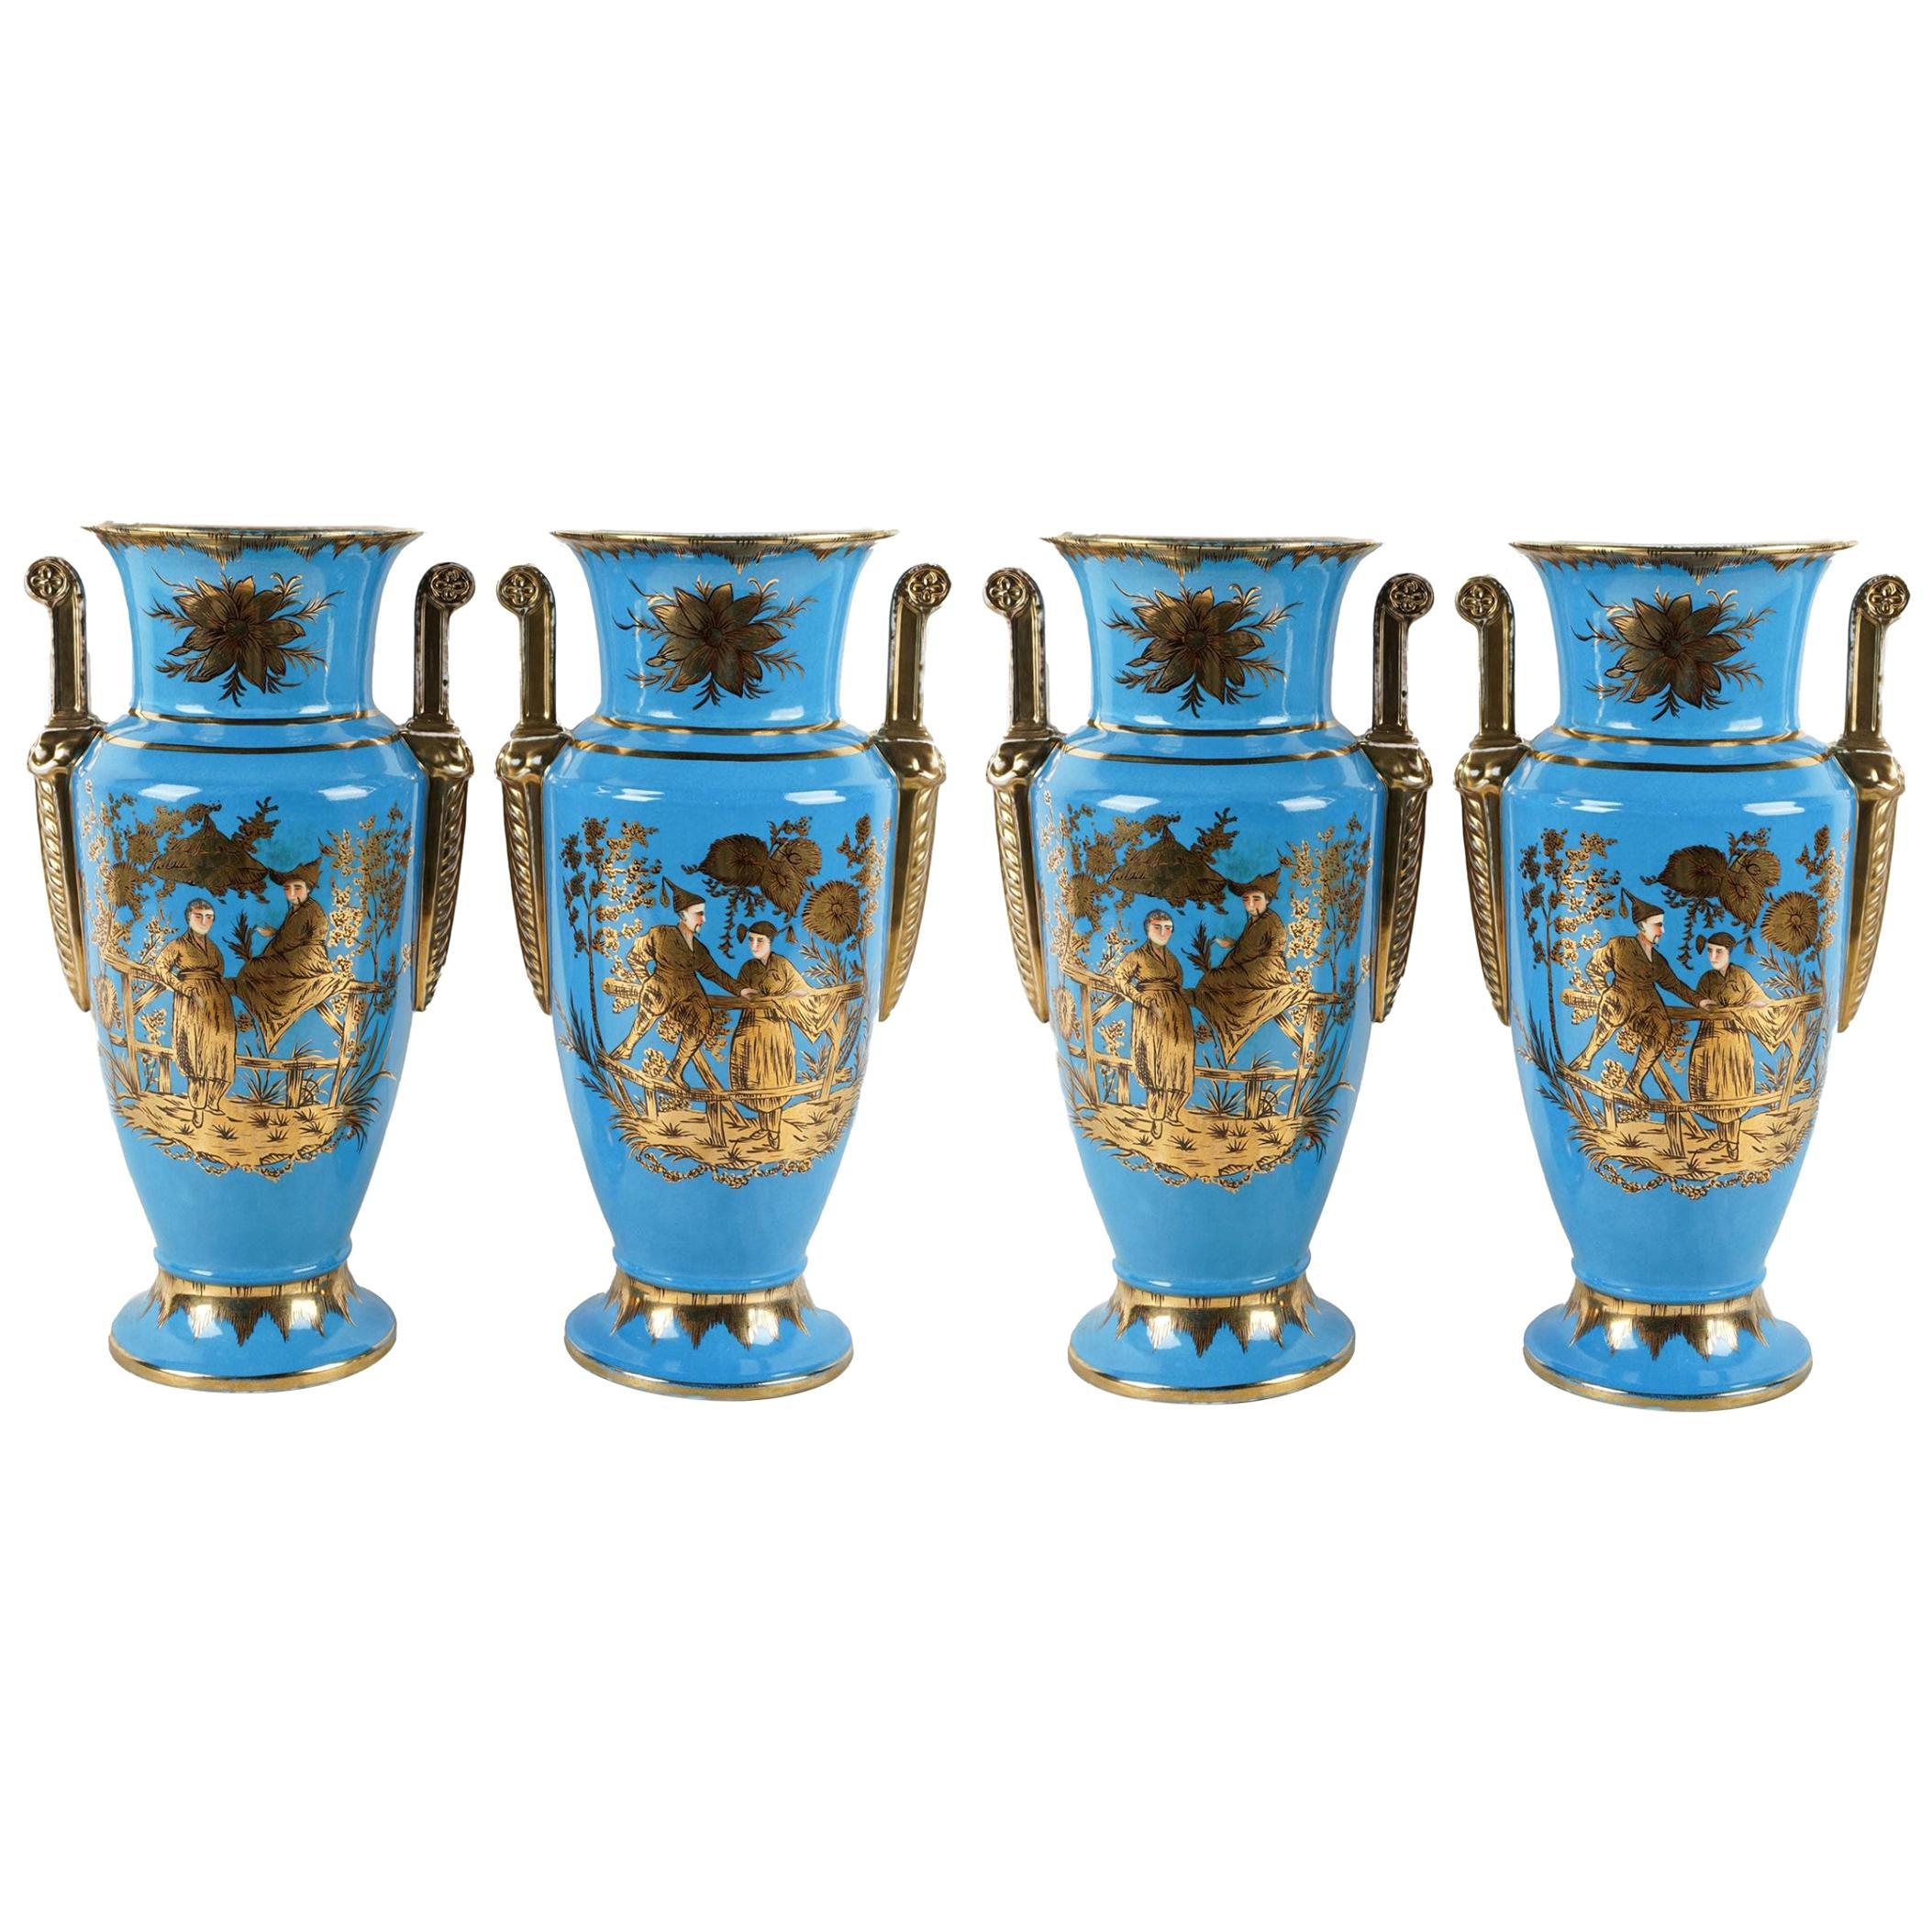 Four Empire Style Cerulean-Glazed Porcelain Vases with Chinoiserie Motifs